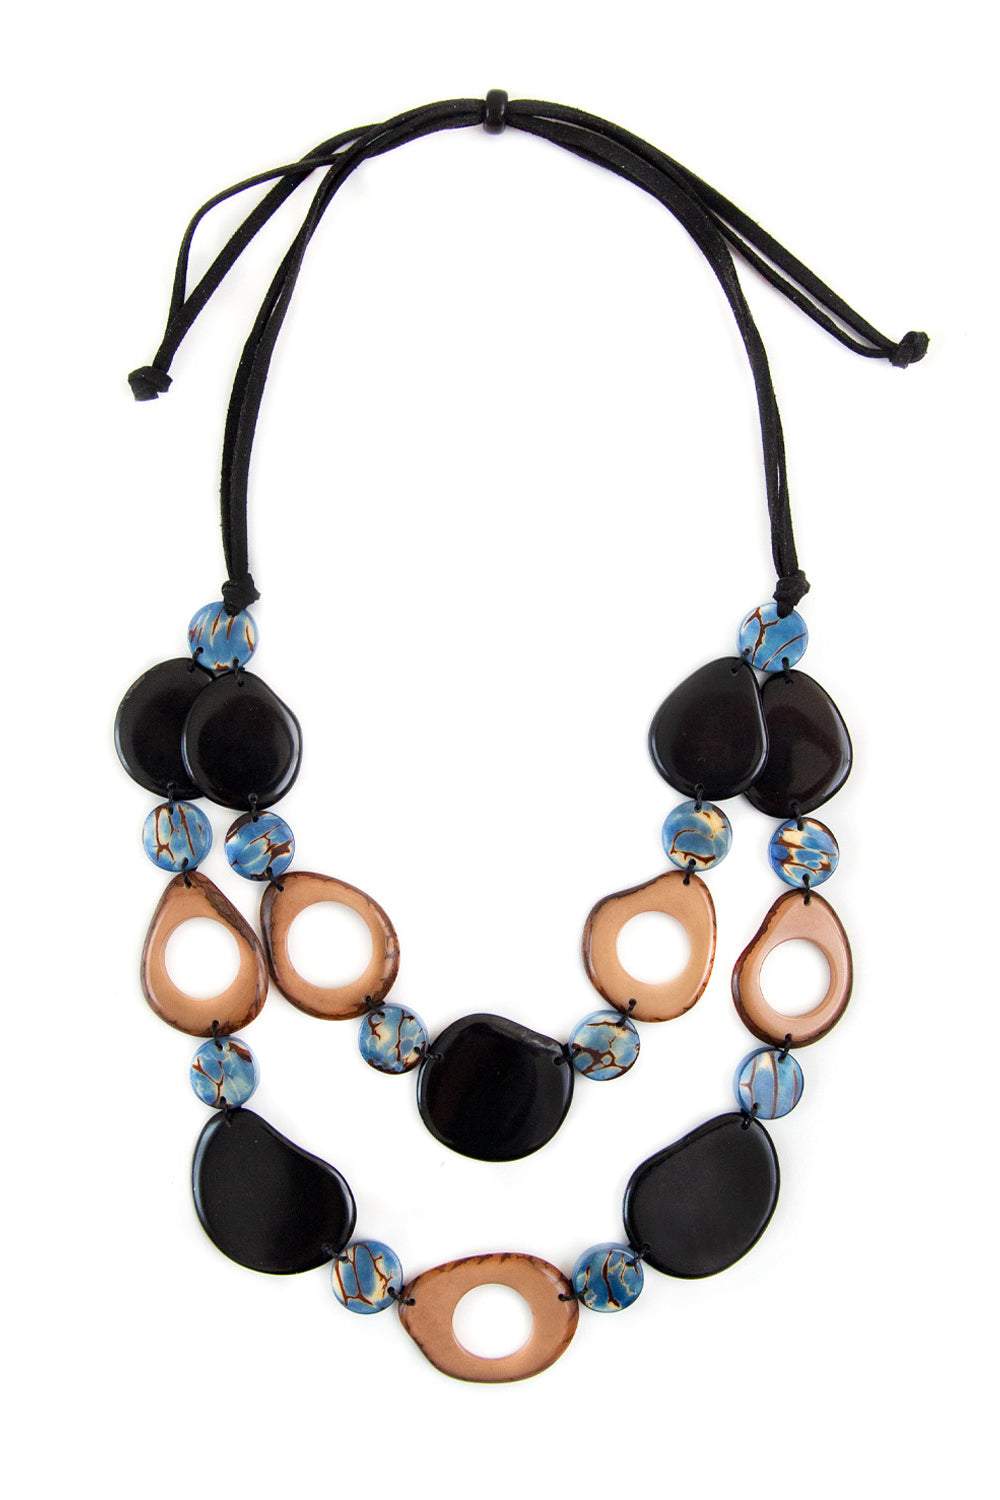 Organic Tagua Jewelry (SC1718) Danna Necklace - chunky two strand necklace with sustainable tagua nut beads in blue, black and brown